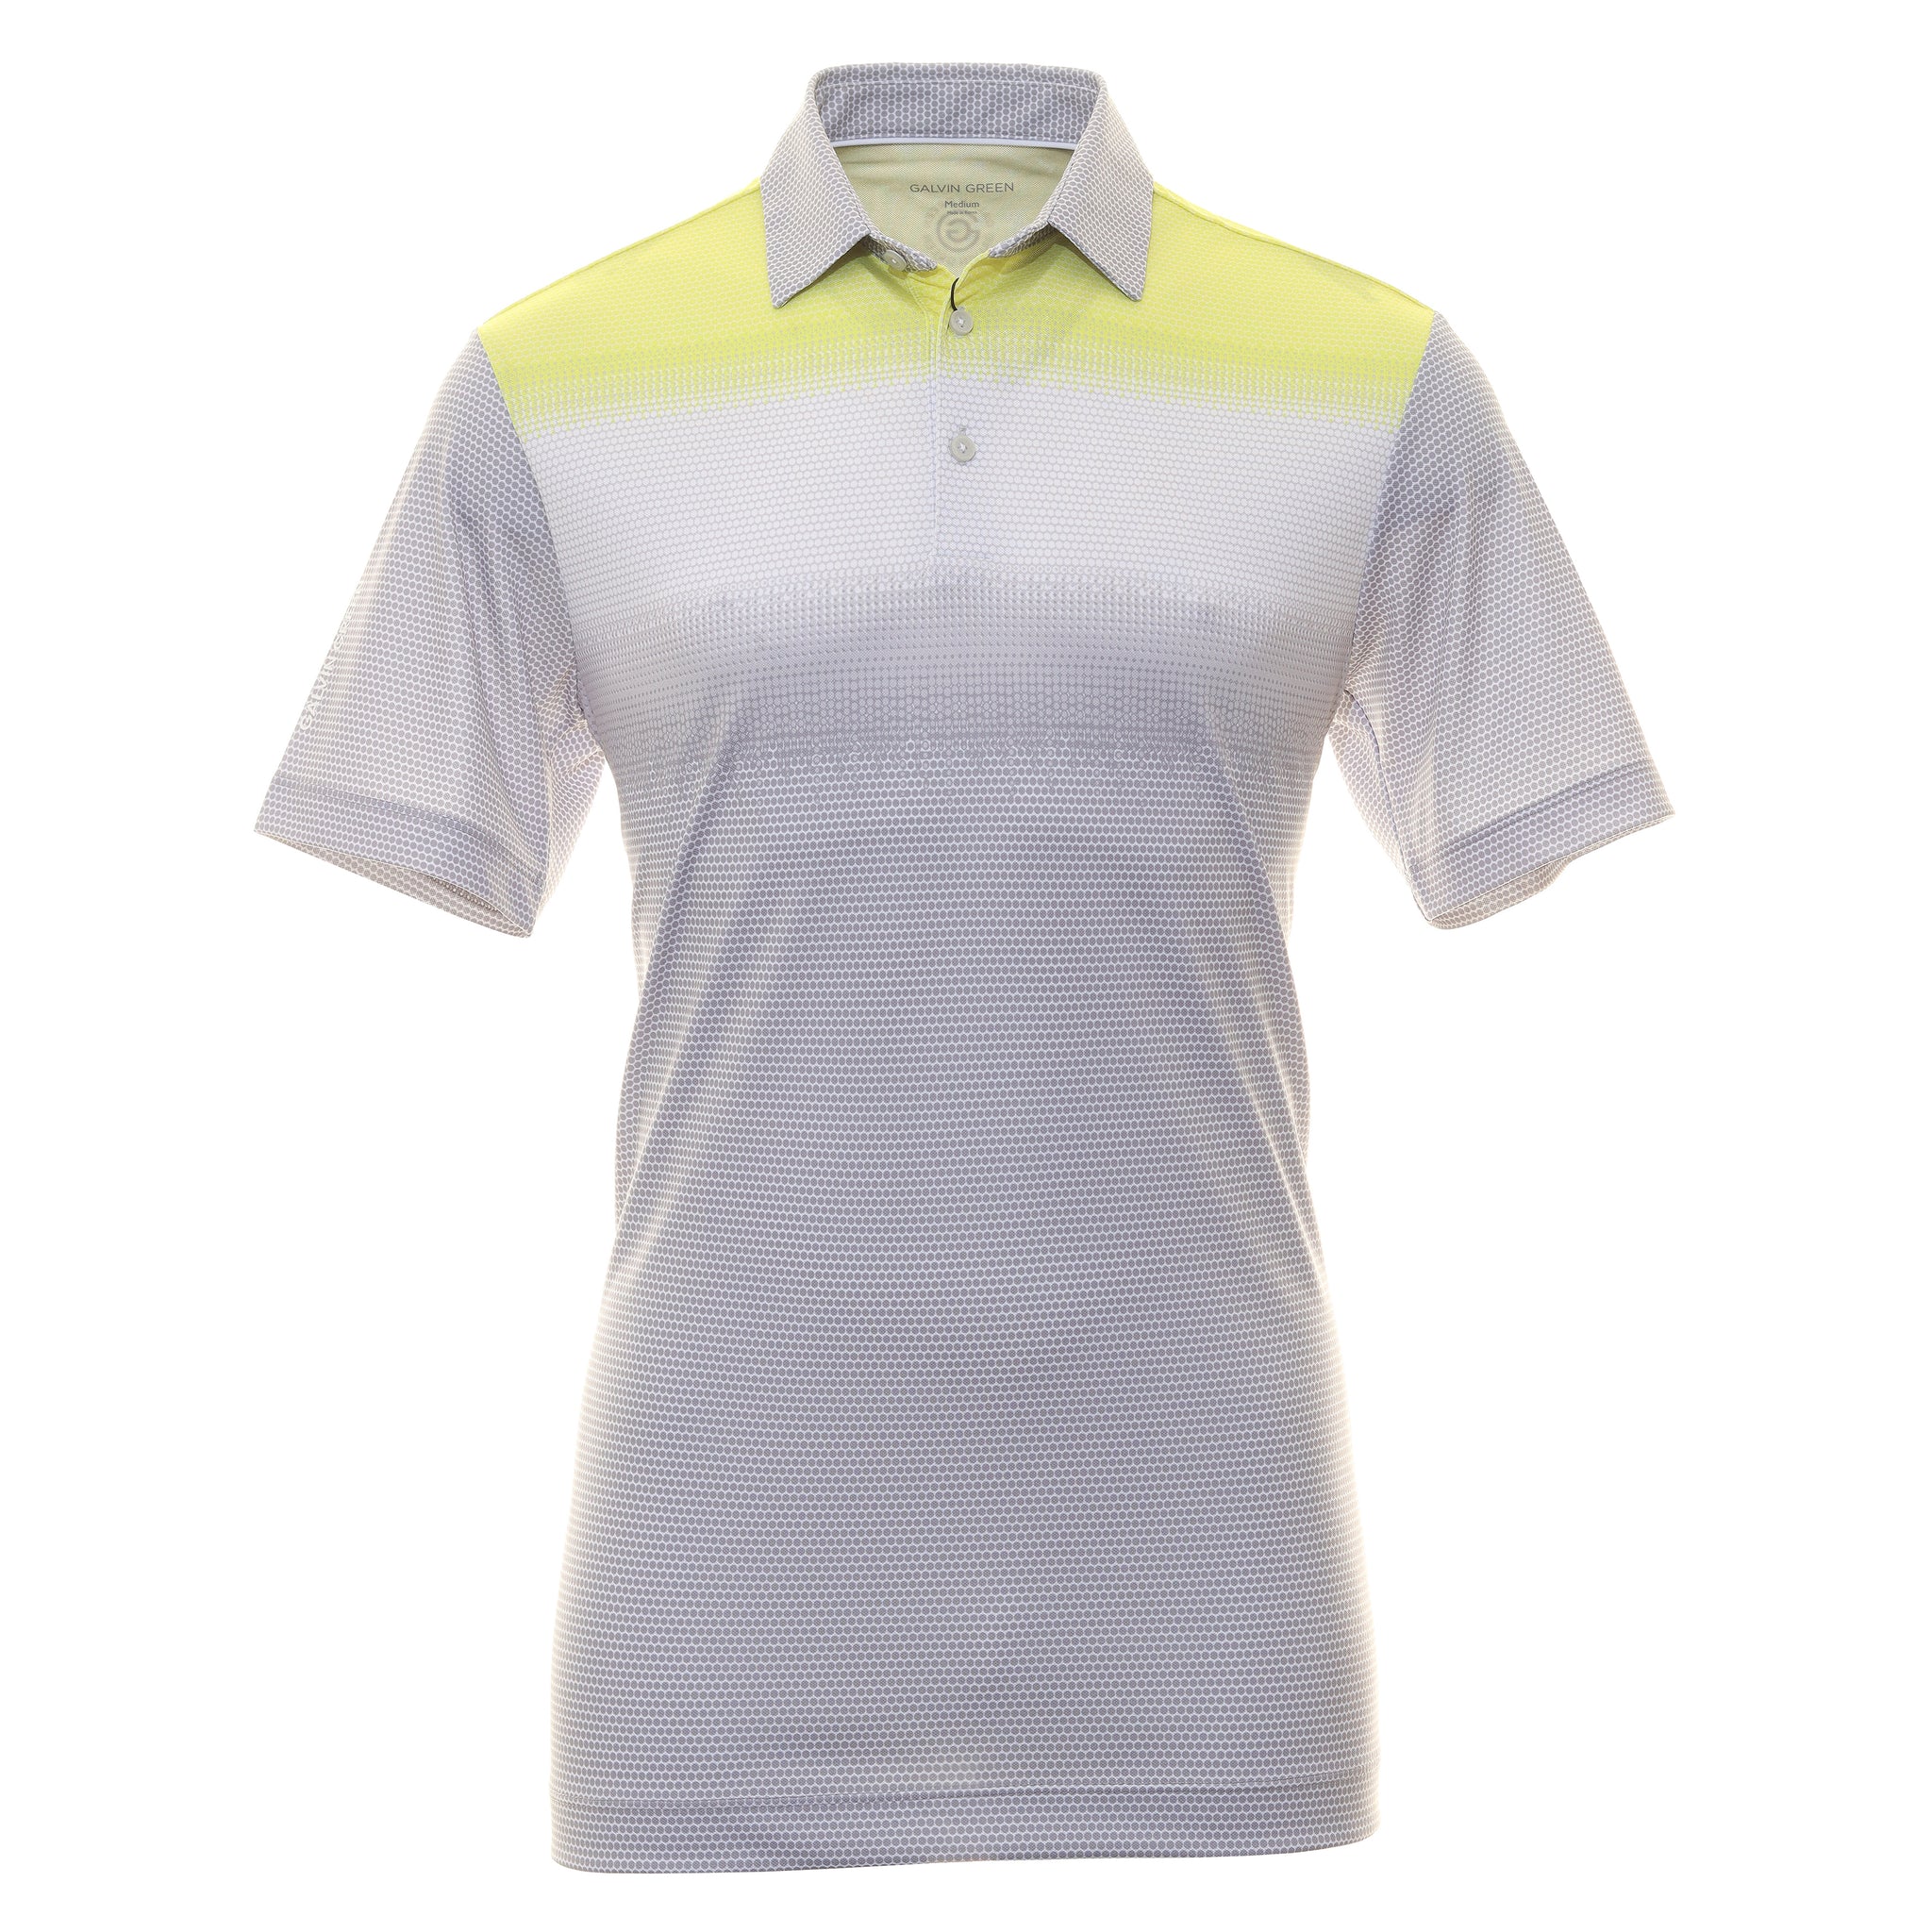 galvin-green-mo-ventil8-golf-shirt-cool-grey-white-sunny-lime-9387